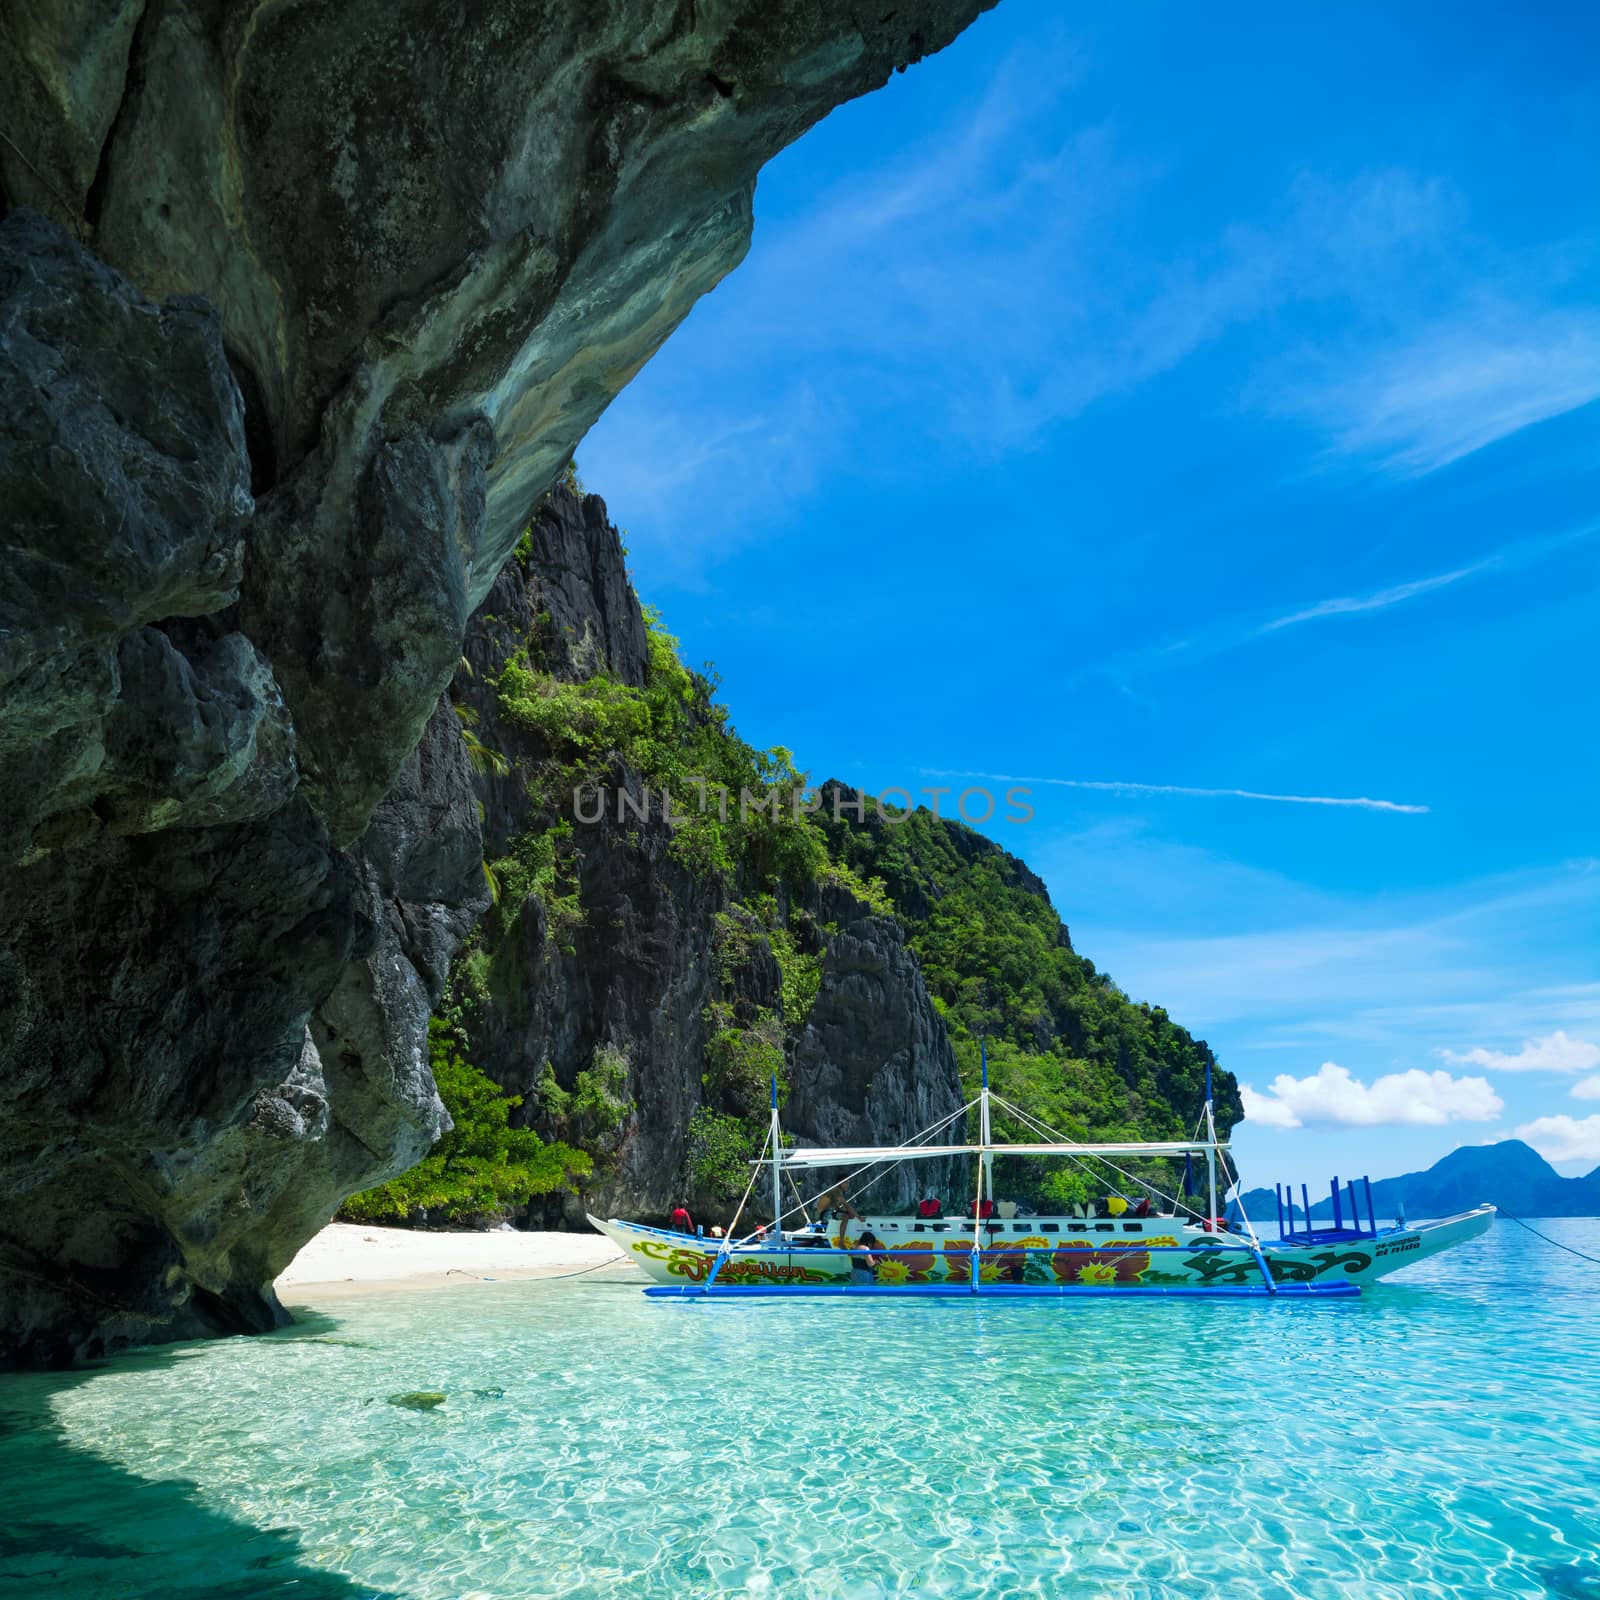  El Nido, Philippines  - May 22, 2014: Island hopping with traditional banca boat in El Nido , Palawan - Philippines . Island hopping is popular activity of tourists visiting Palawan. EL NIDO, PHILIPPINES - MAY 22, 2014: Island hopping with traditional banca boat in El Nido , Palawan on May 22.  Island hopping is popular activity of tourists visiting Palawan.